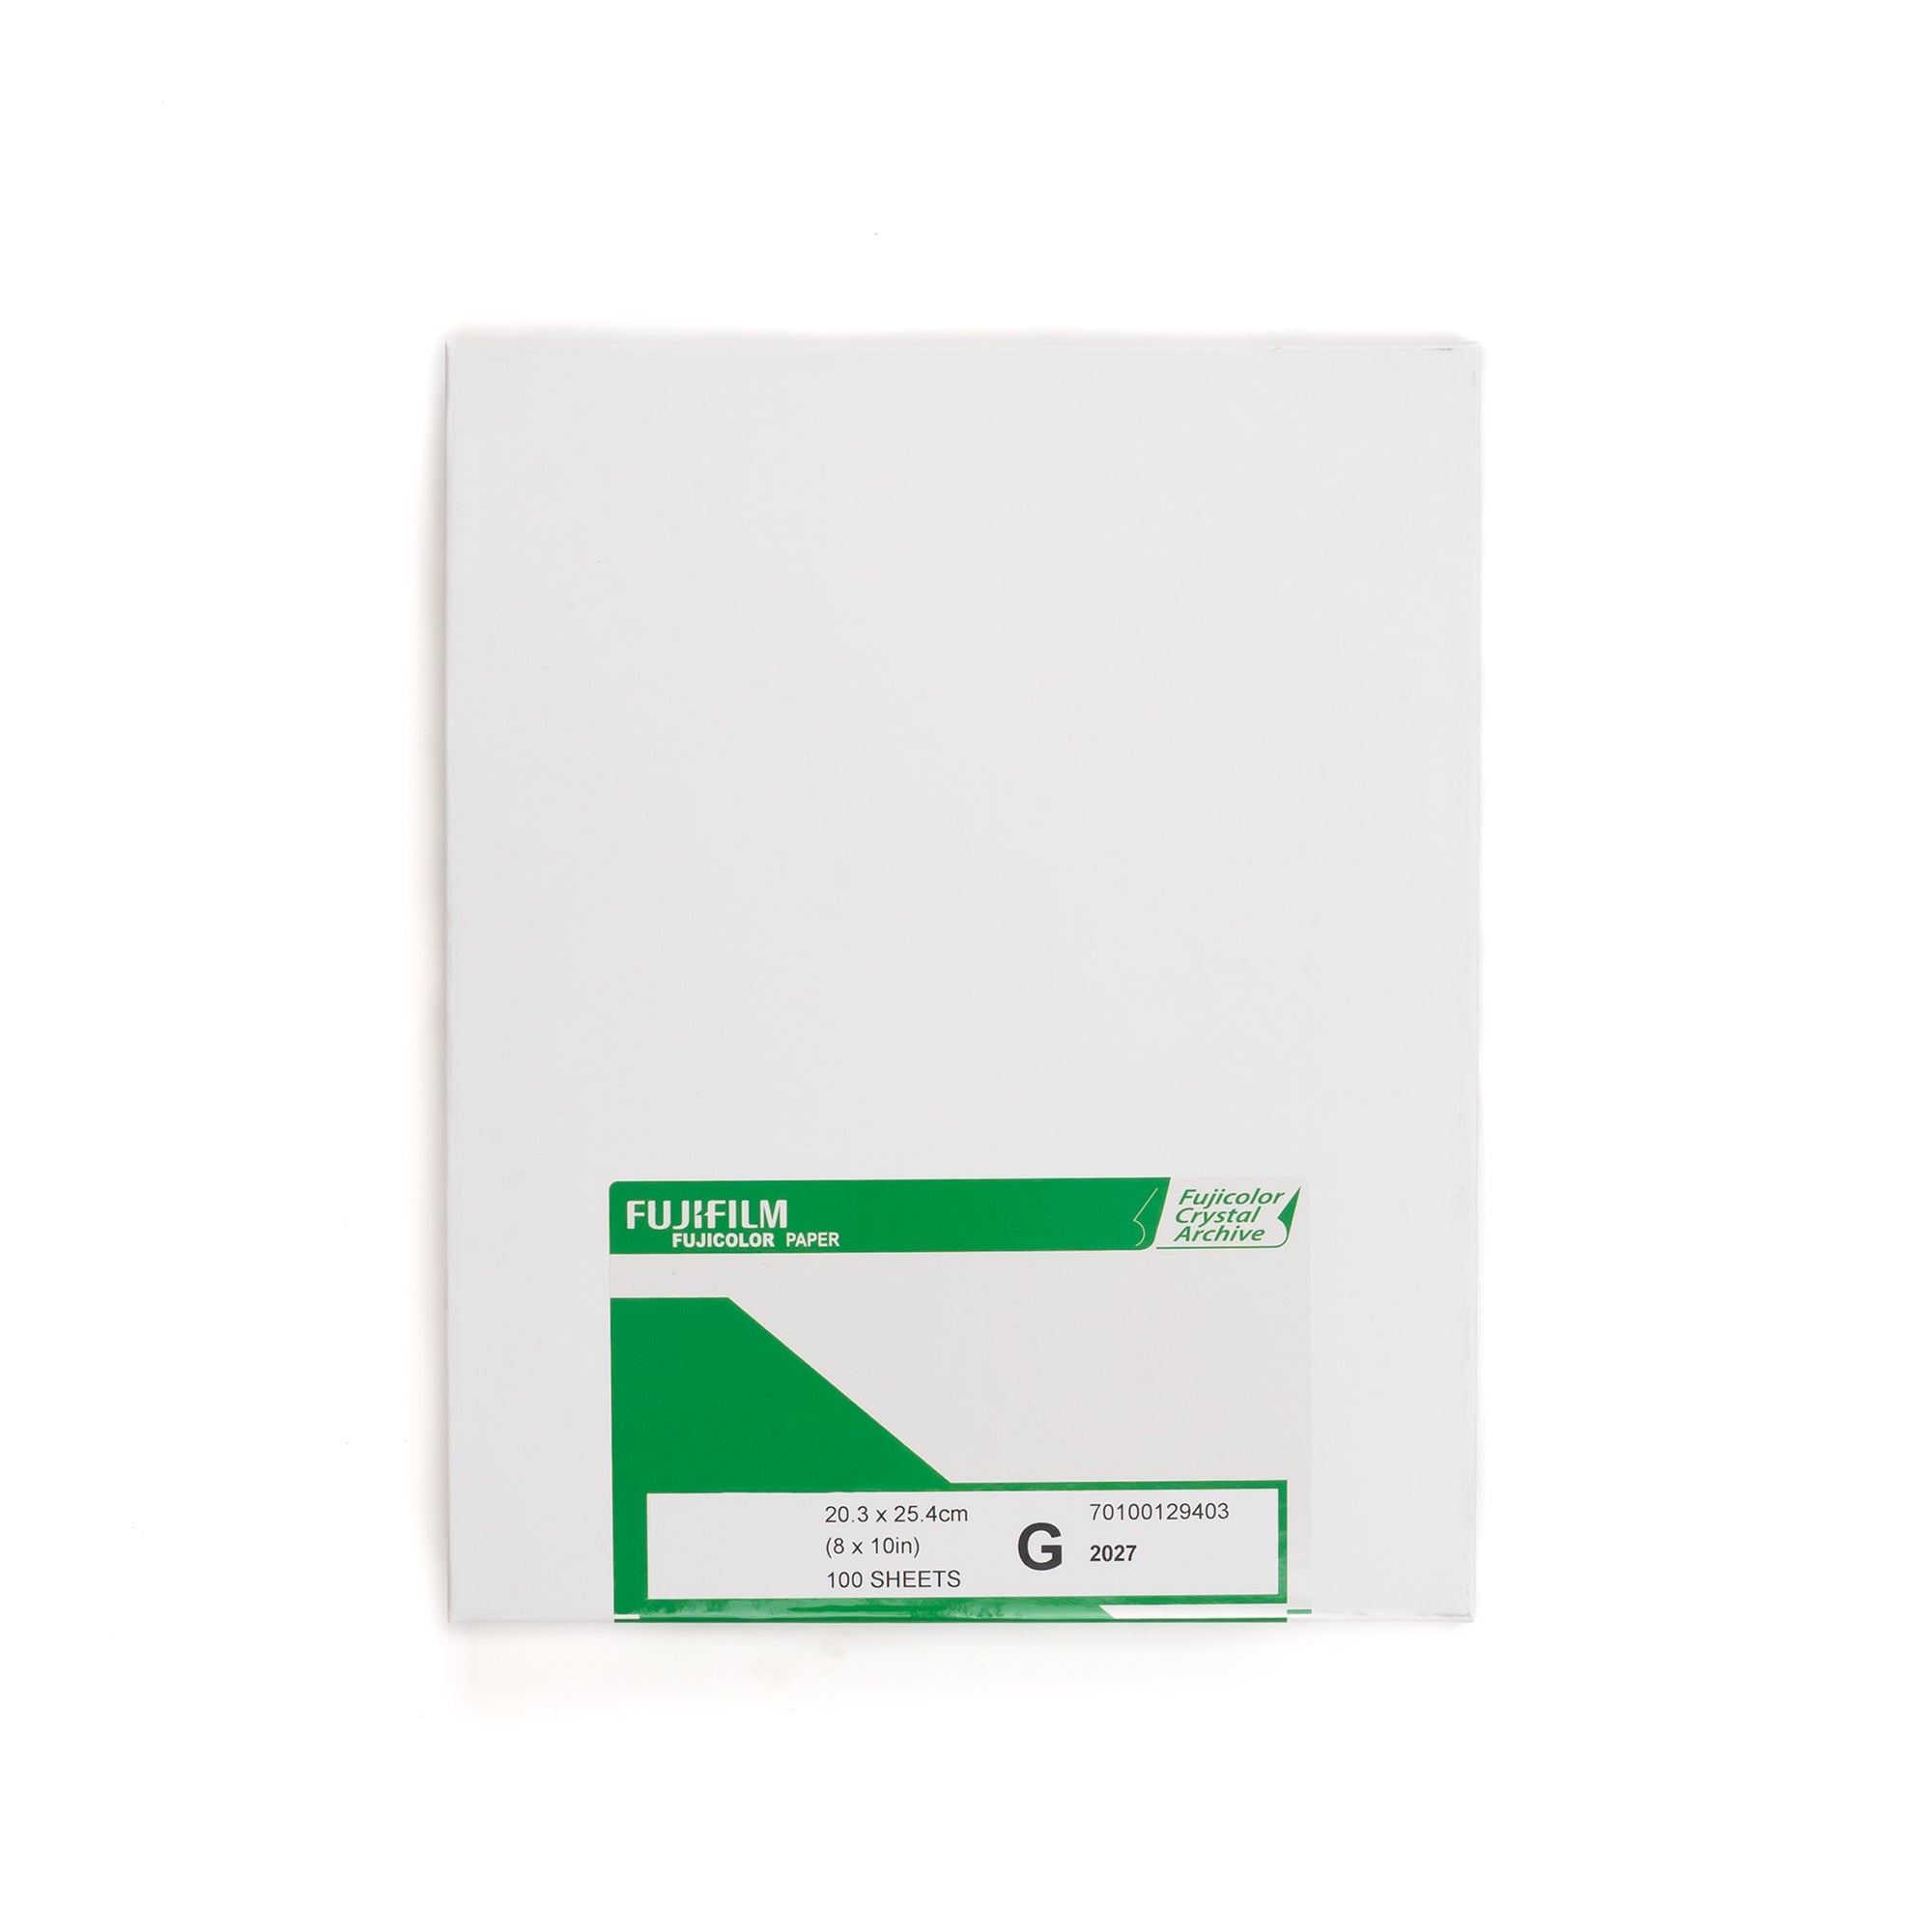 Fujifilm Crystal Archive 8x10 Paper (100 Sheets)